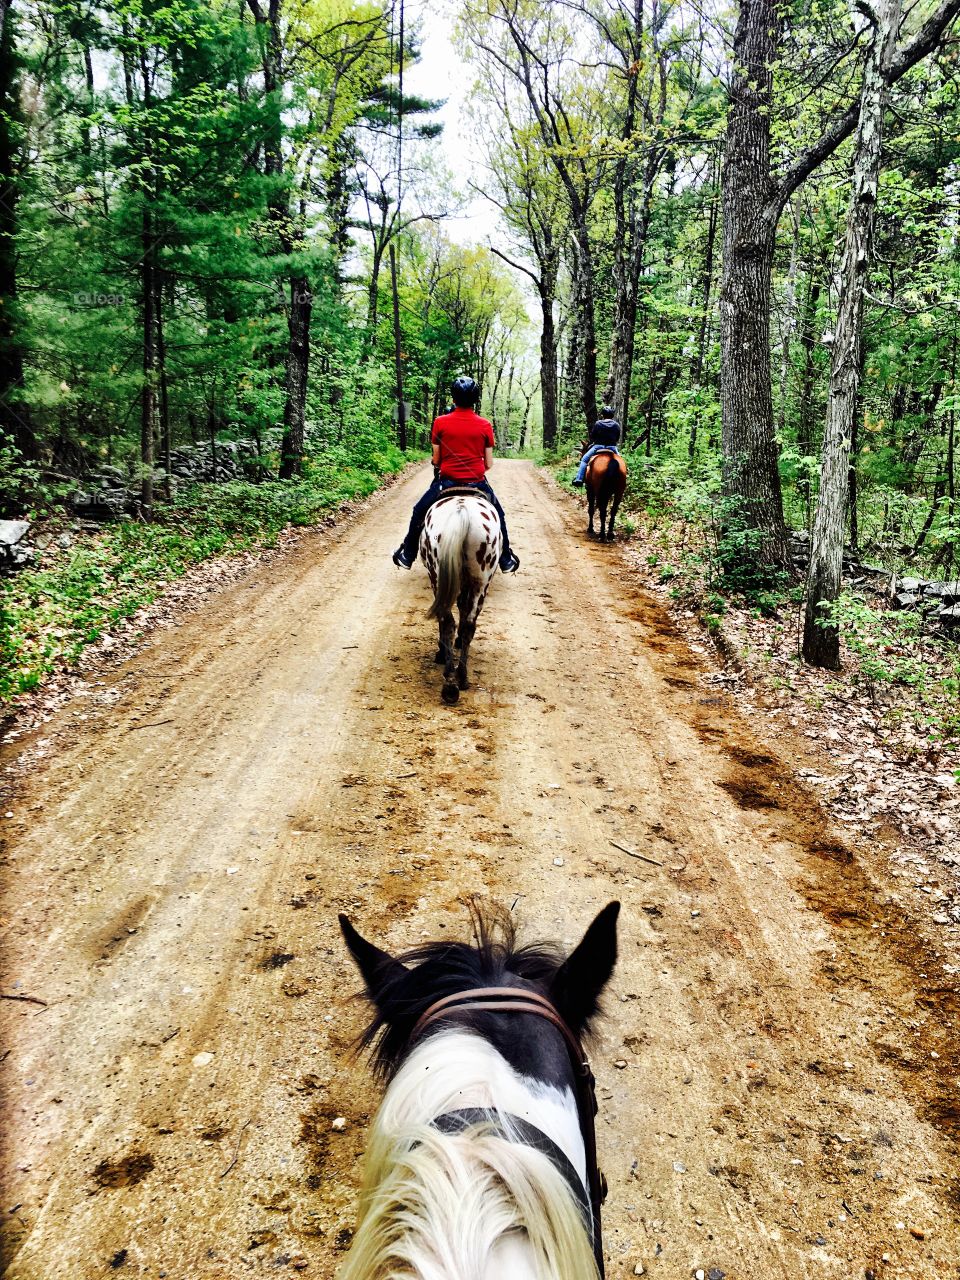 Riding the Trails